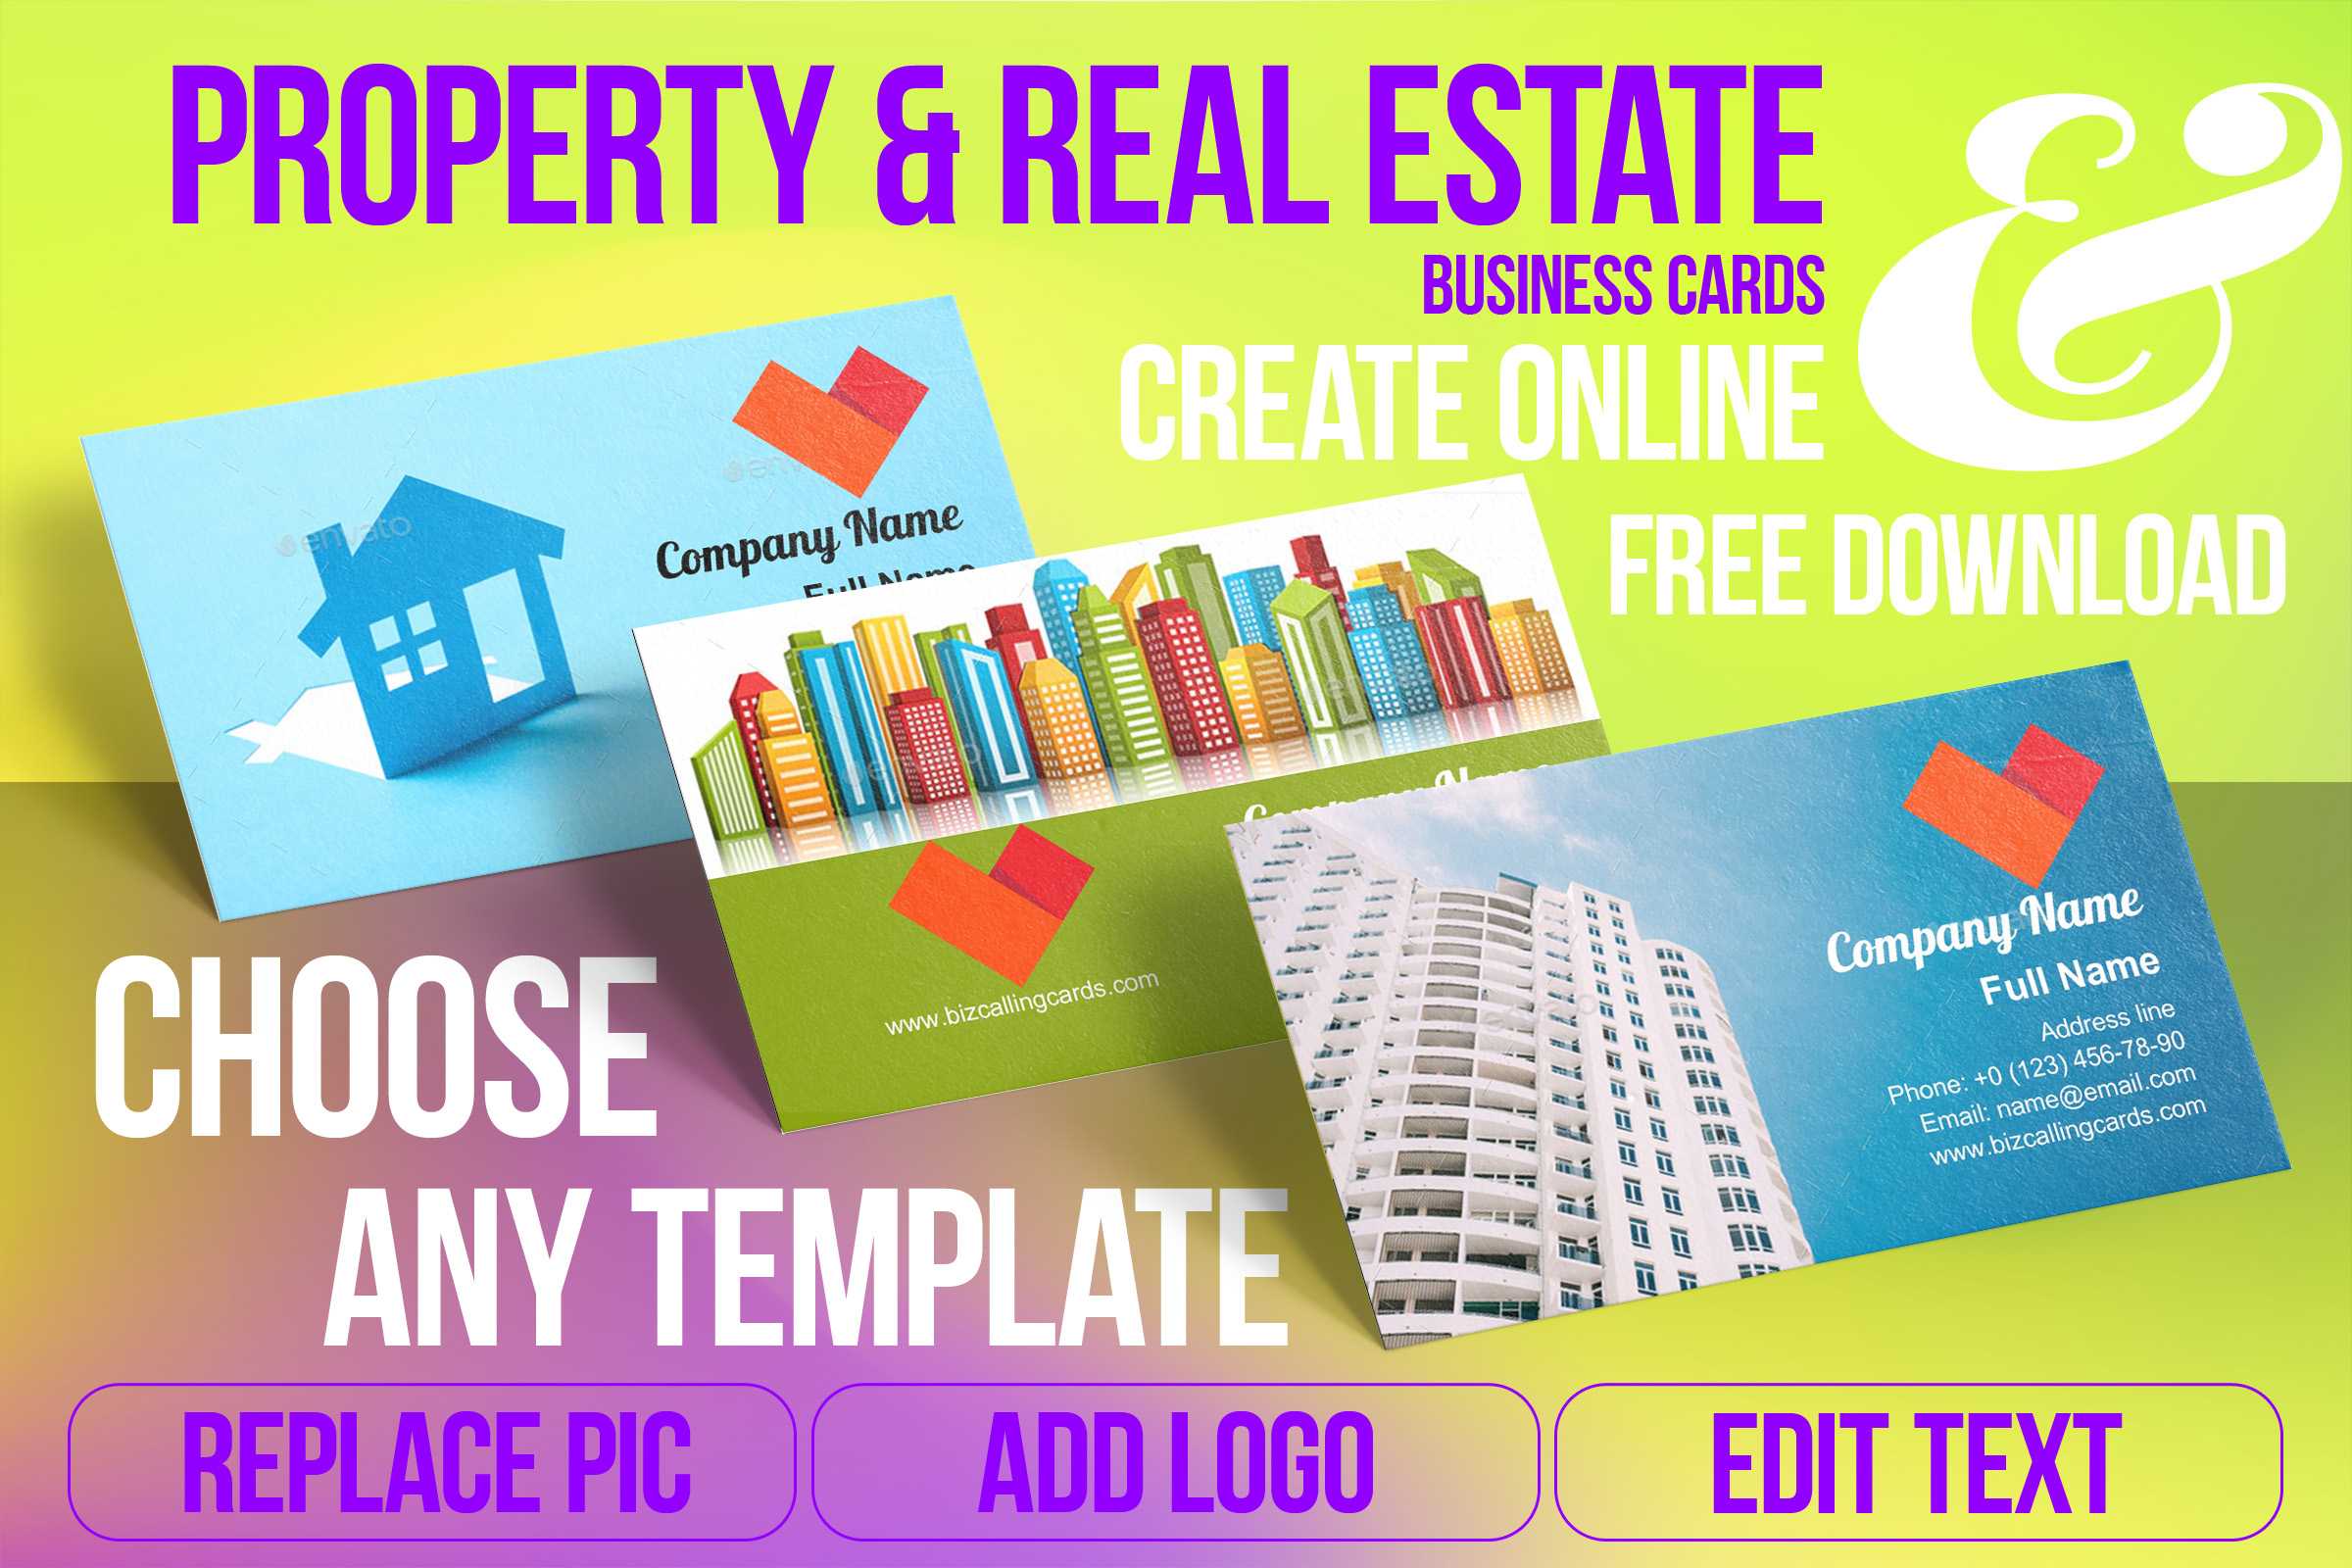 Real Estate Business Card Samples For Create Custom Design In Real Estate Business Cards Templates Free